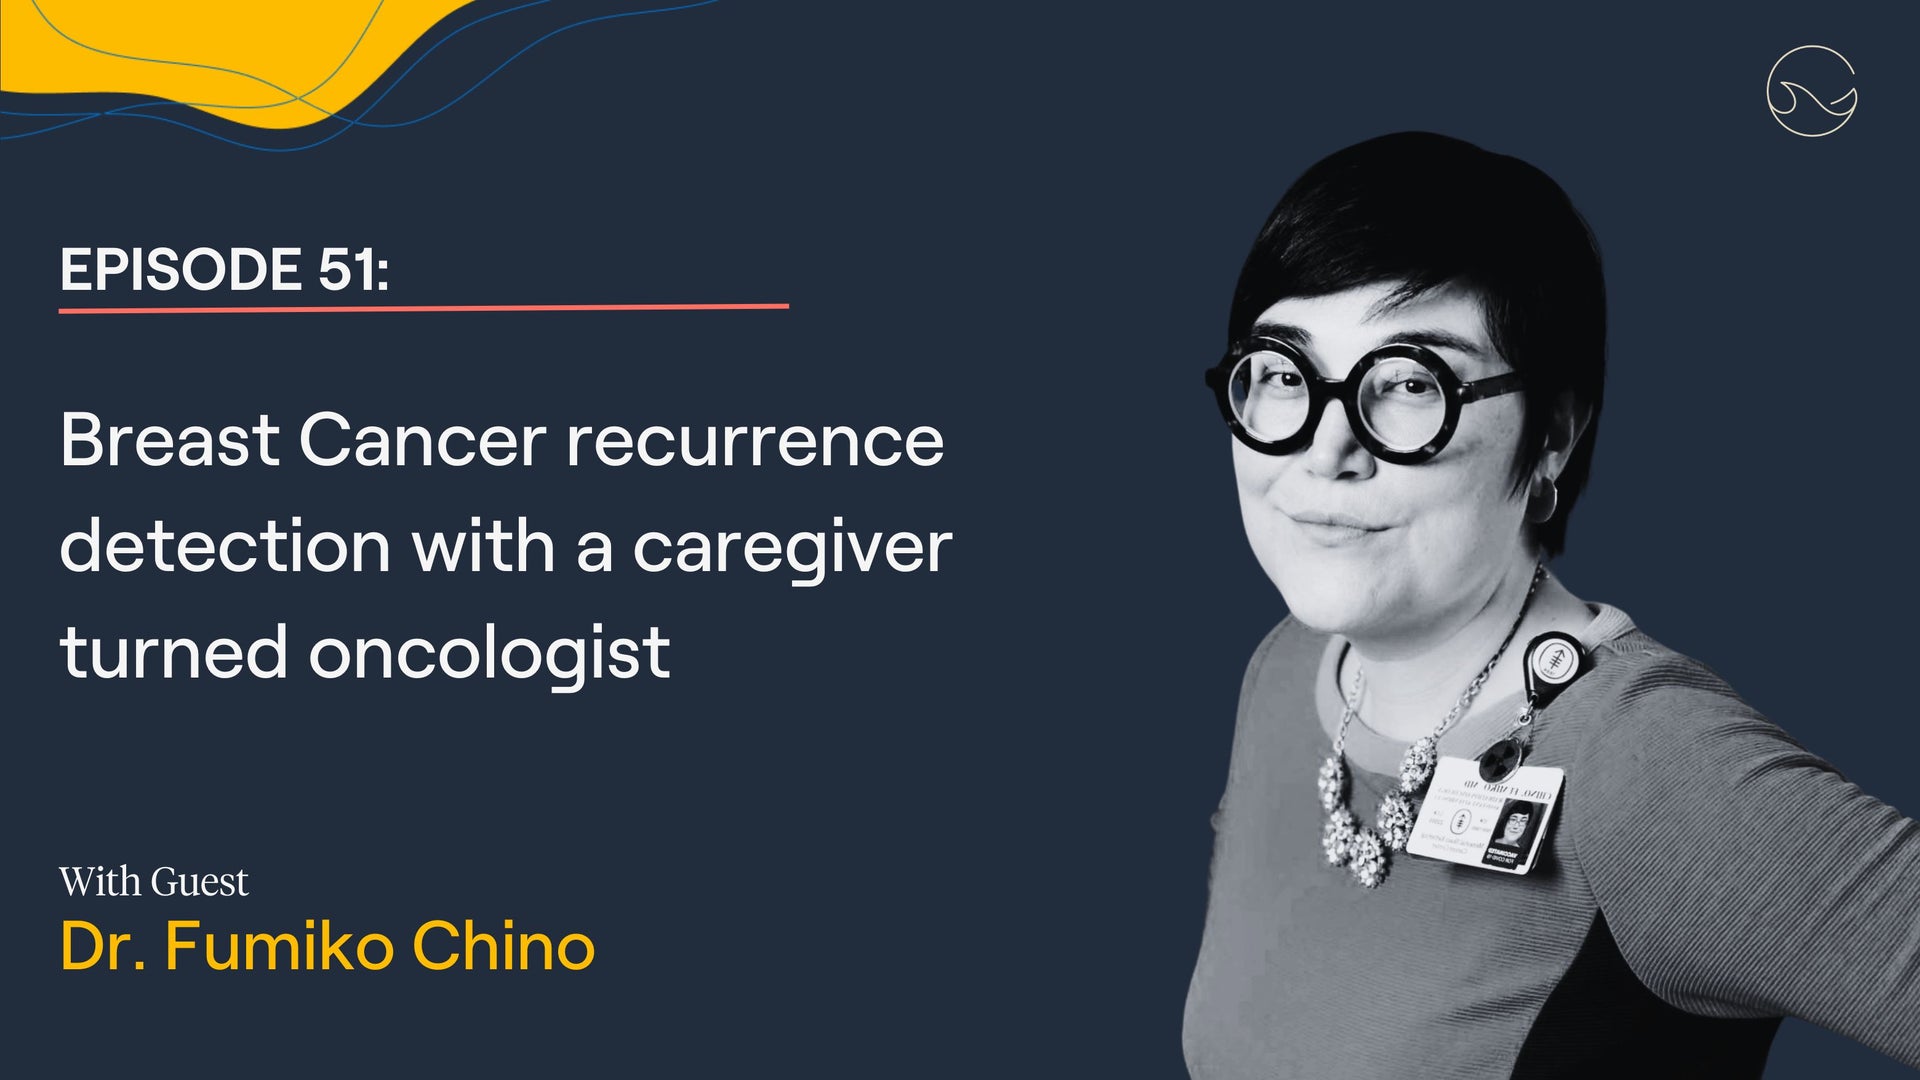 Load video: The latest episode of &quot;The Patient from Hell&quot; features Dr. Fumiko Chino from Memorial Sloan Kettering Cancer Center talking about breast cancer recurrence detection as well as her journey from art director to cancer caregiver to oncologist.